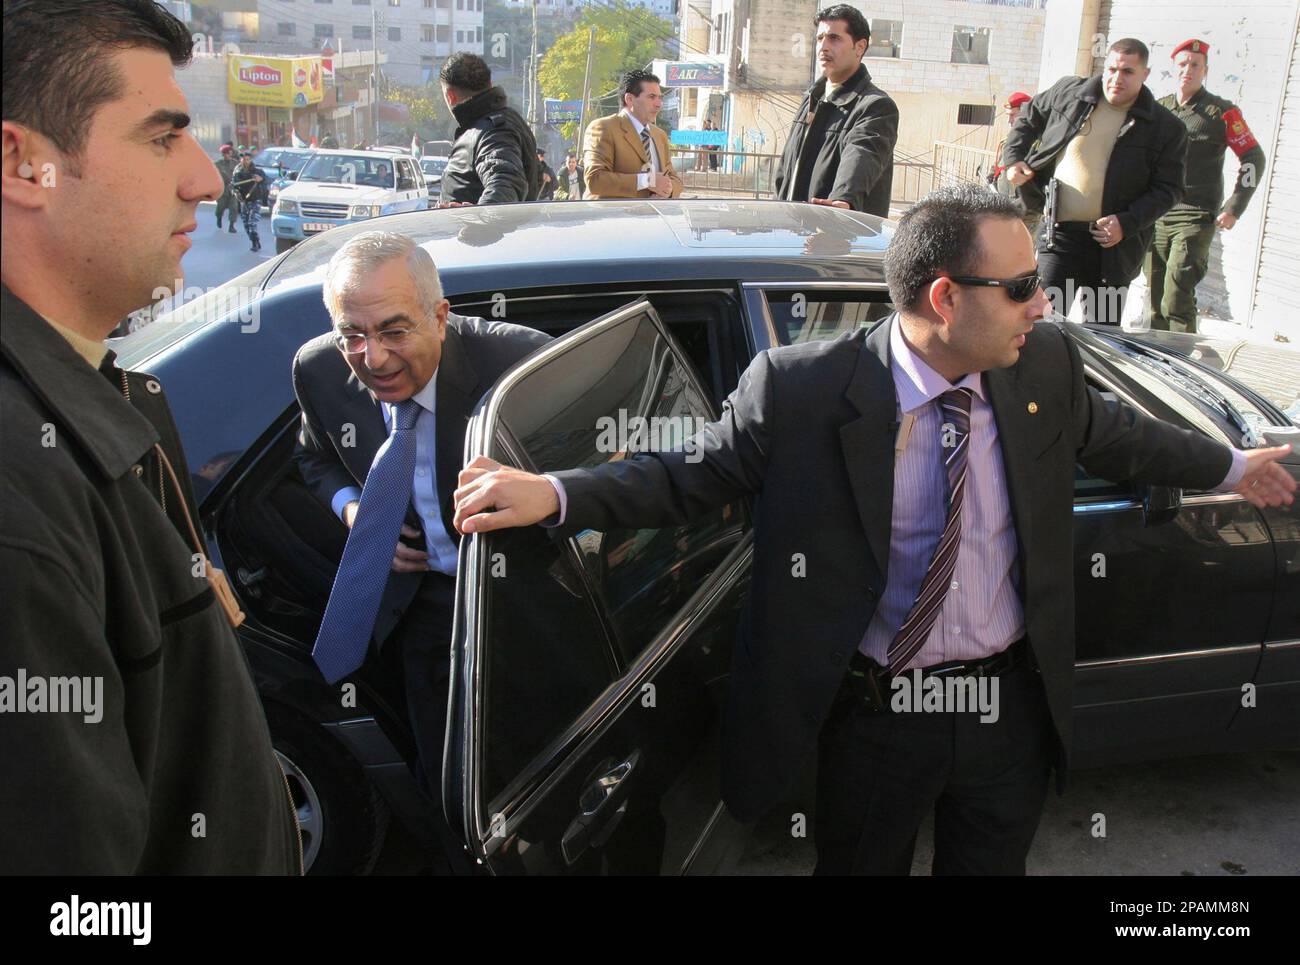 Palestinian Prime Minister Salam Fayyad is surrounded by bodyguards as he  gets out of his car during a visit to the West Bank town of Nablus,  Saturday, Dec. 29, 2007.(AP Photo/Nasser Ishtayeh